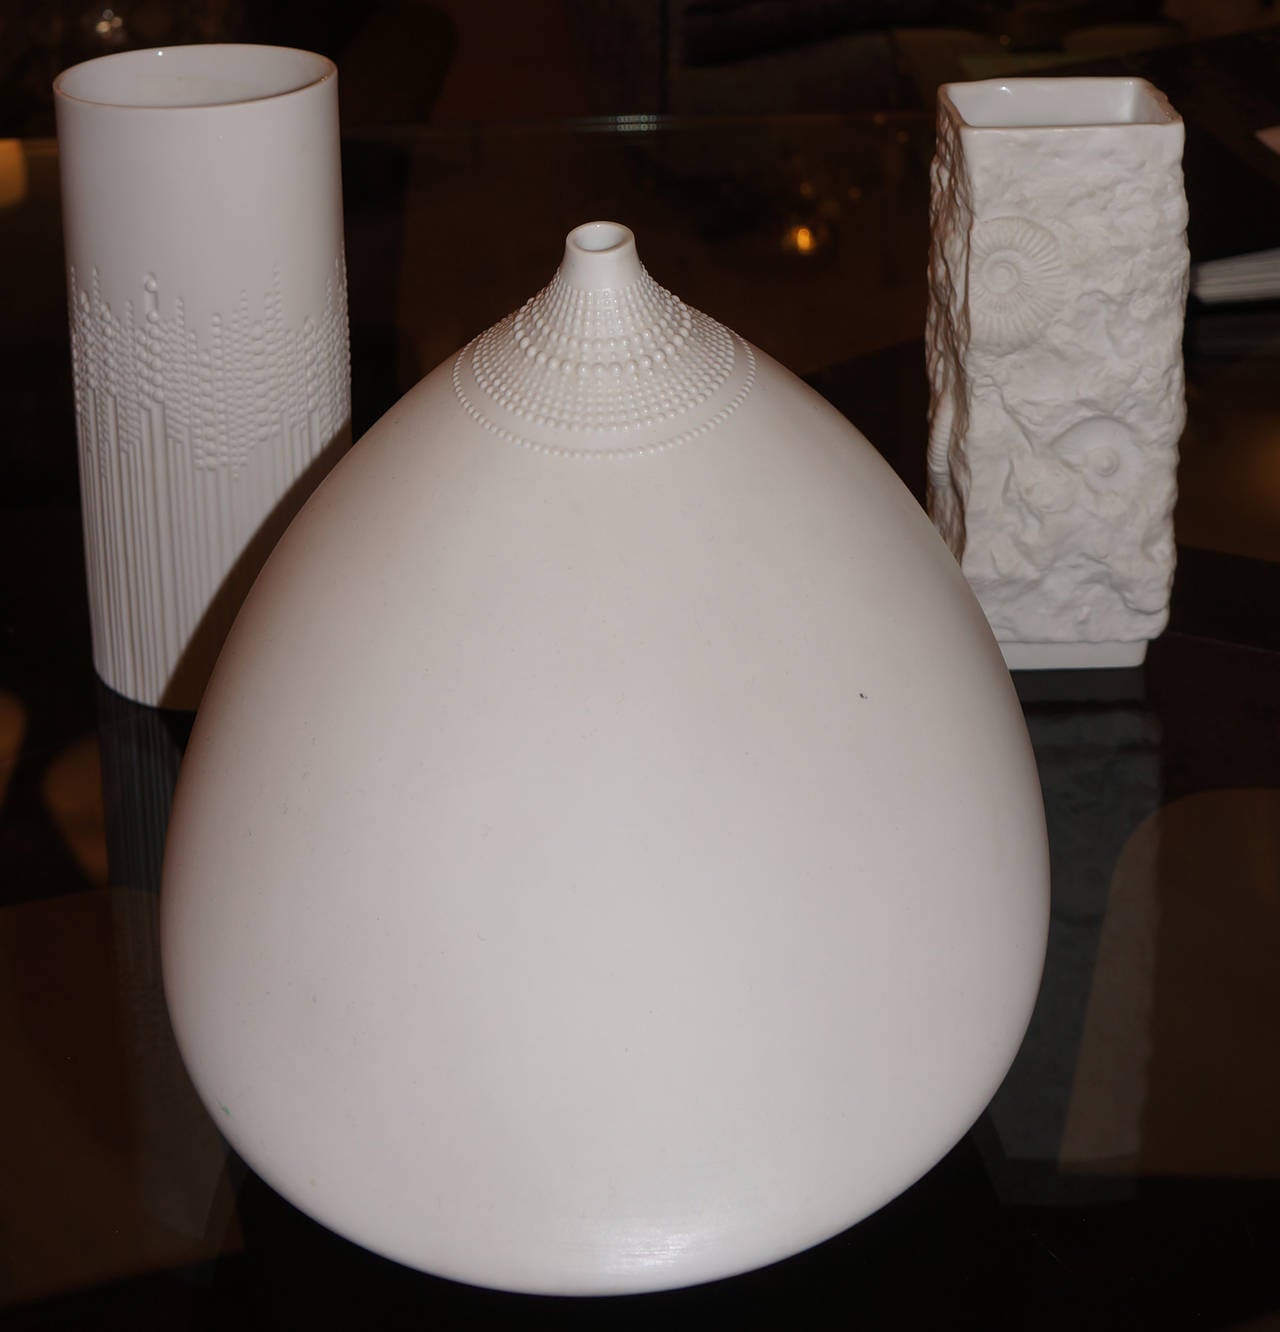 Balanced group of three German, Mid-Century white porcelain vases . Two,  the largest one and the tall oval one, are by Tapio Wirkalla for  Rosenthal. The third vase with fossils engraved was made by Kaiser, another well know German pottery maker.